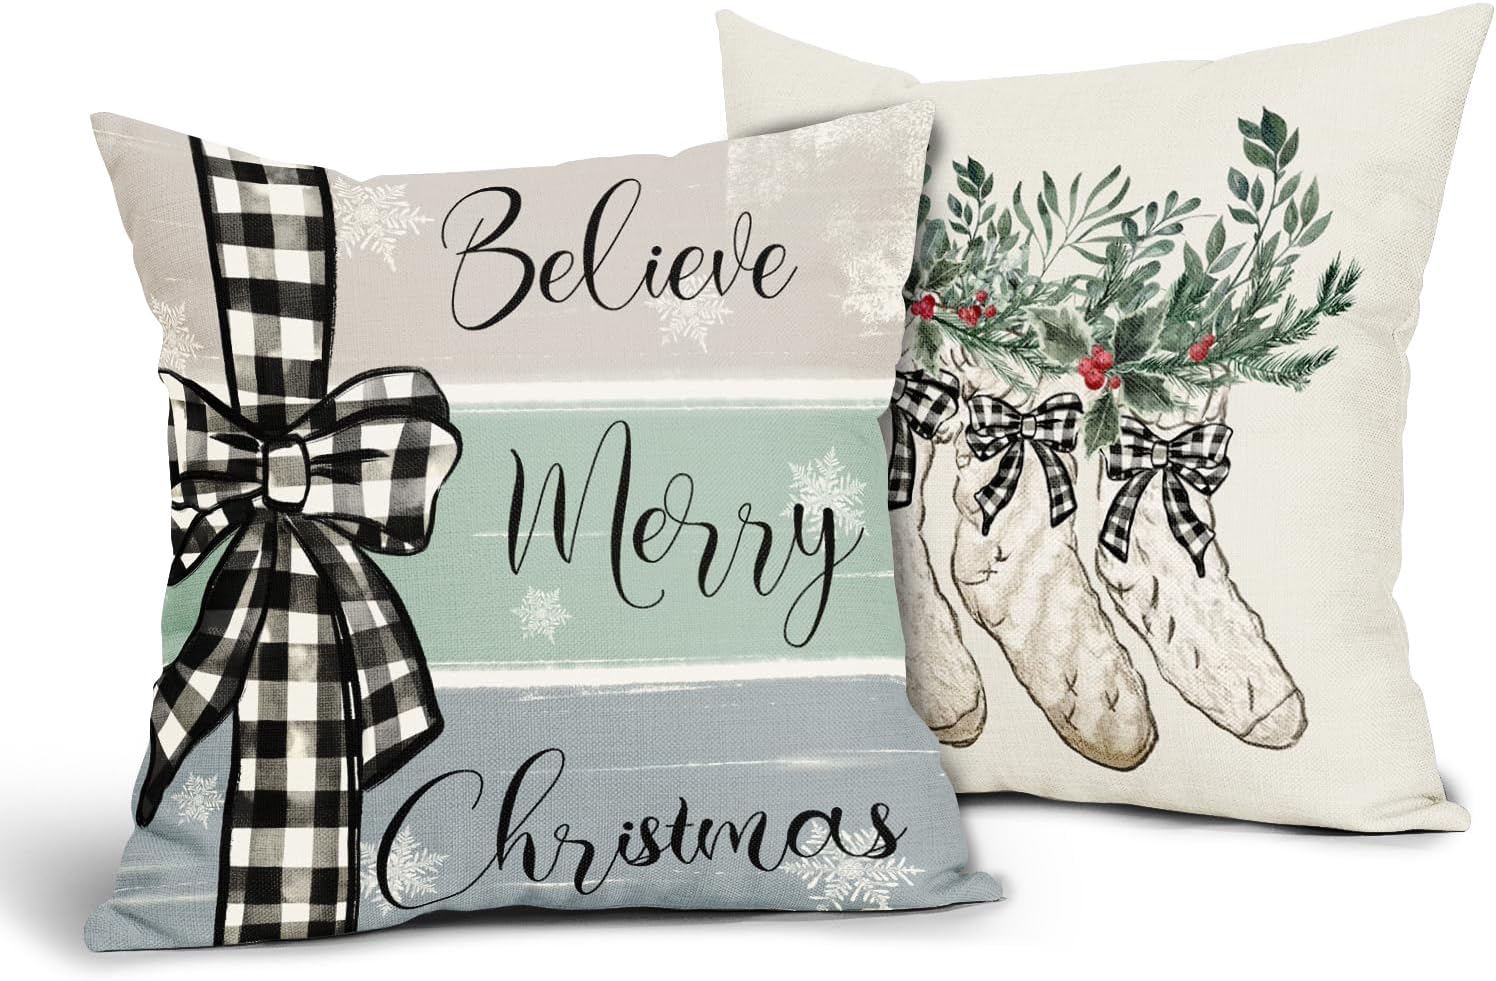 Christmas Pillow Covers 18x18 Inch Set of 2 Buffalo Plaid Winter Snowflake Throw Pillow Covers Teal Christmas Pillowscase Cotton Linen Square Cushion Covers for Sofa Couch Bedroom Home Decoration